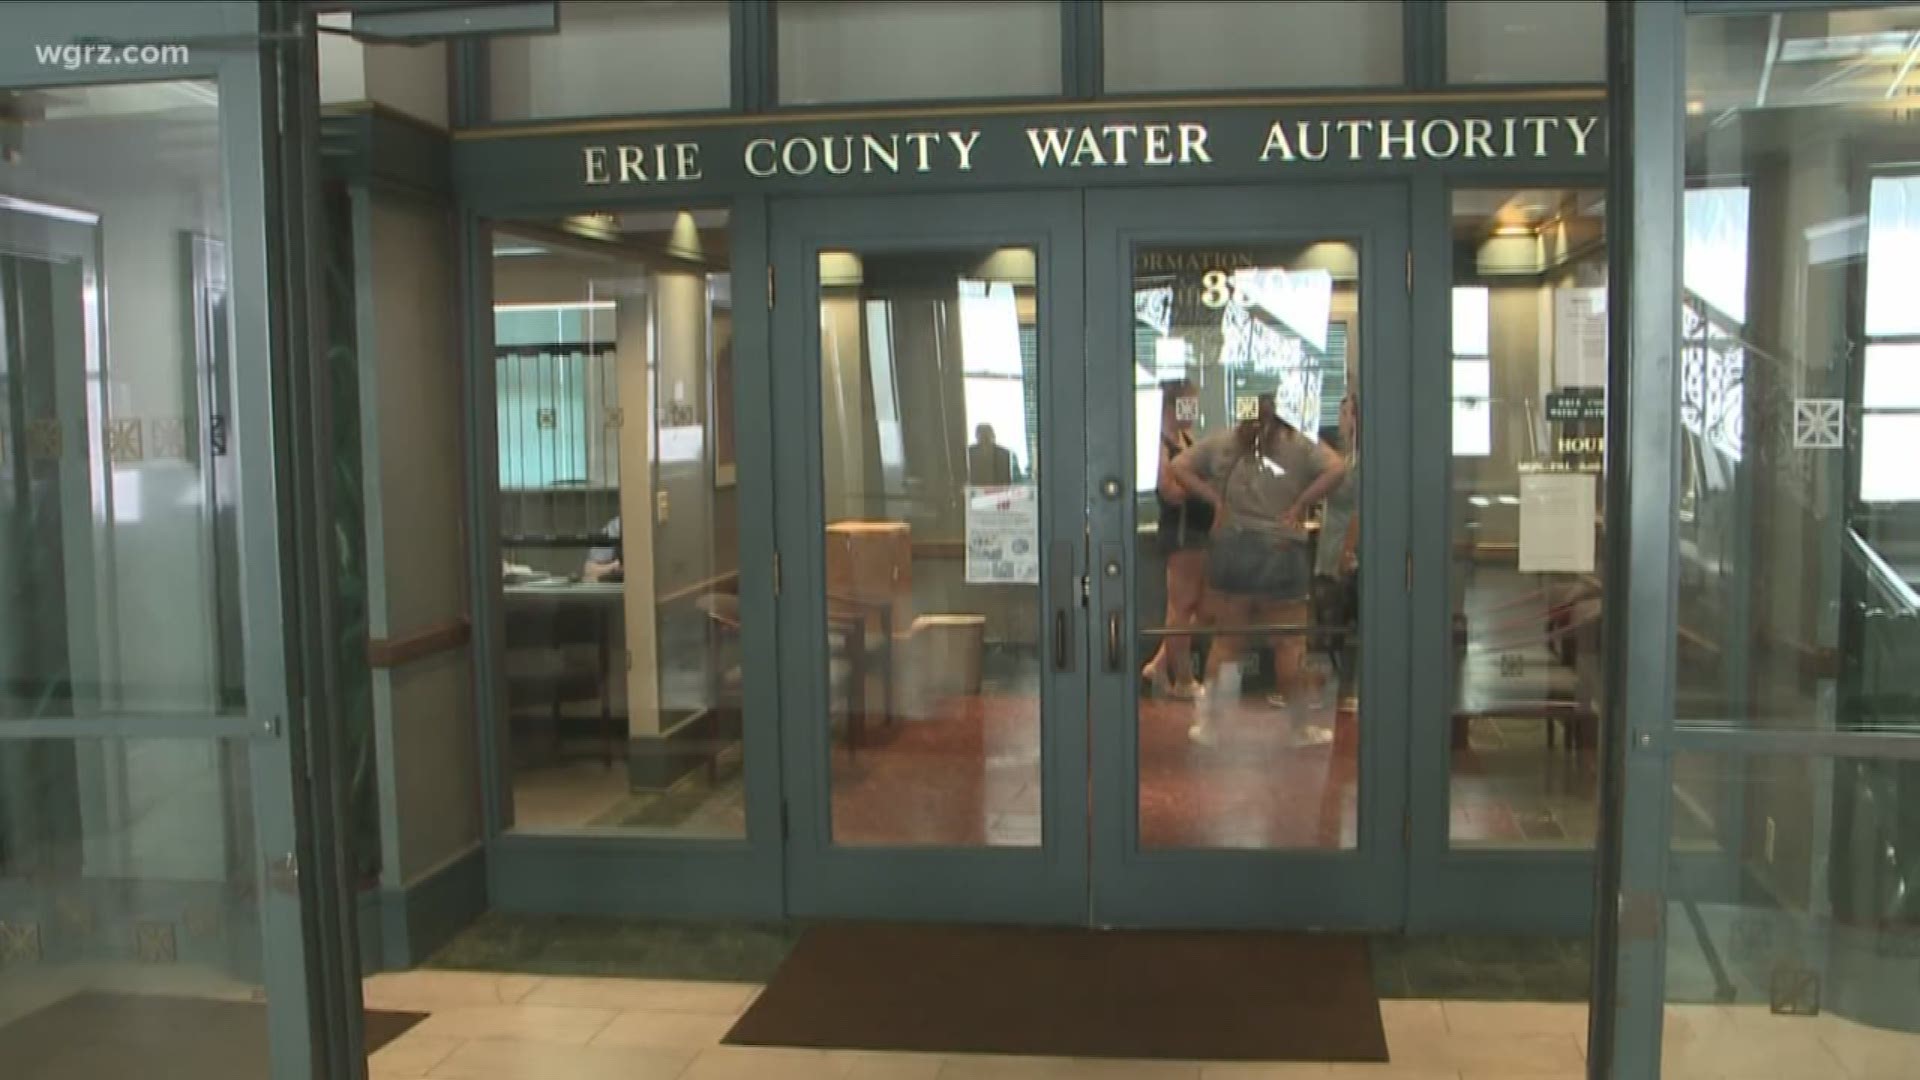 D.A. Launches Water Authority Probe